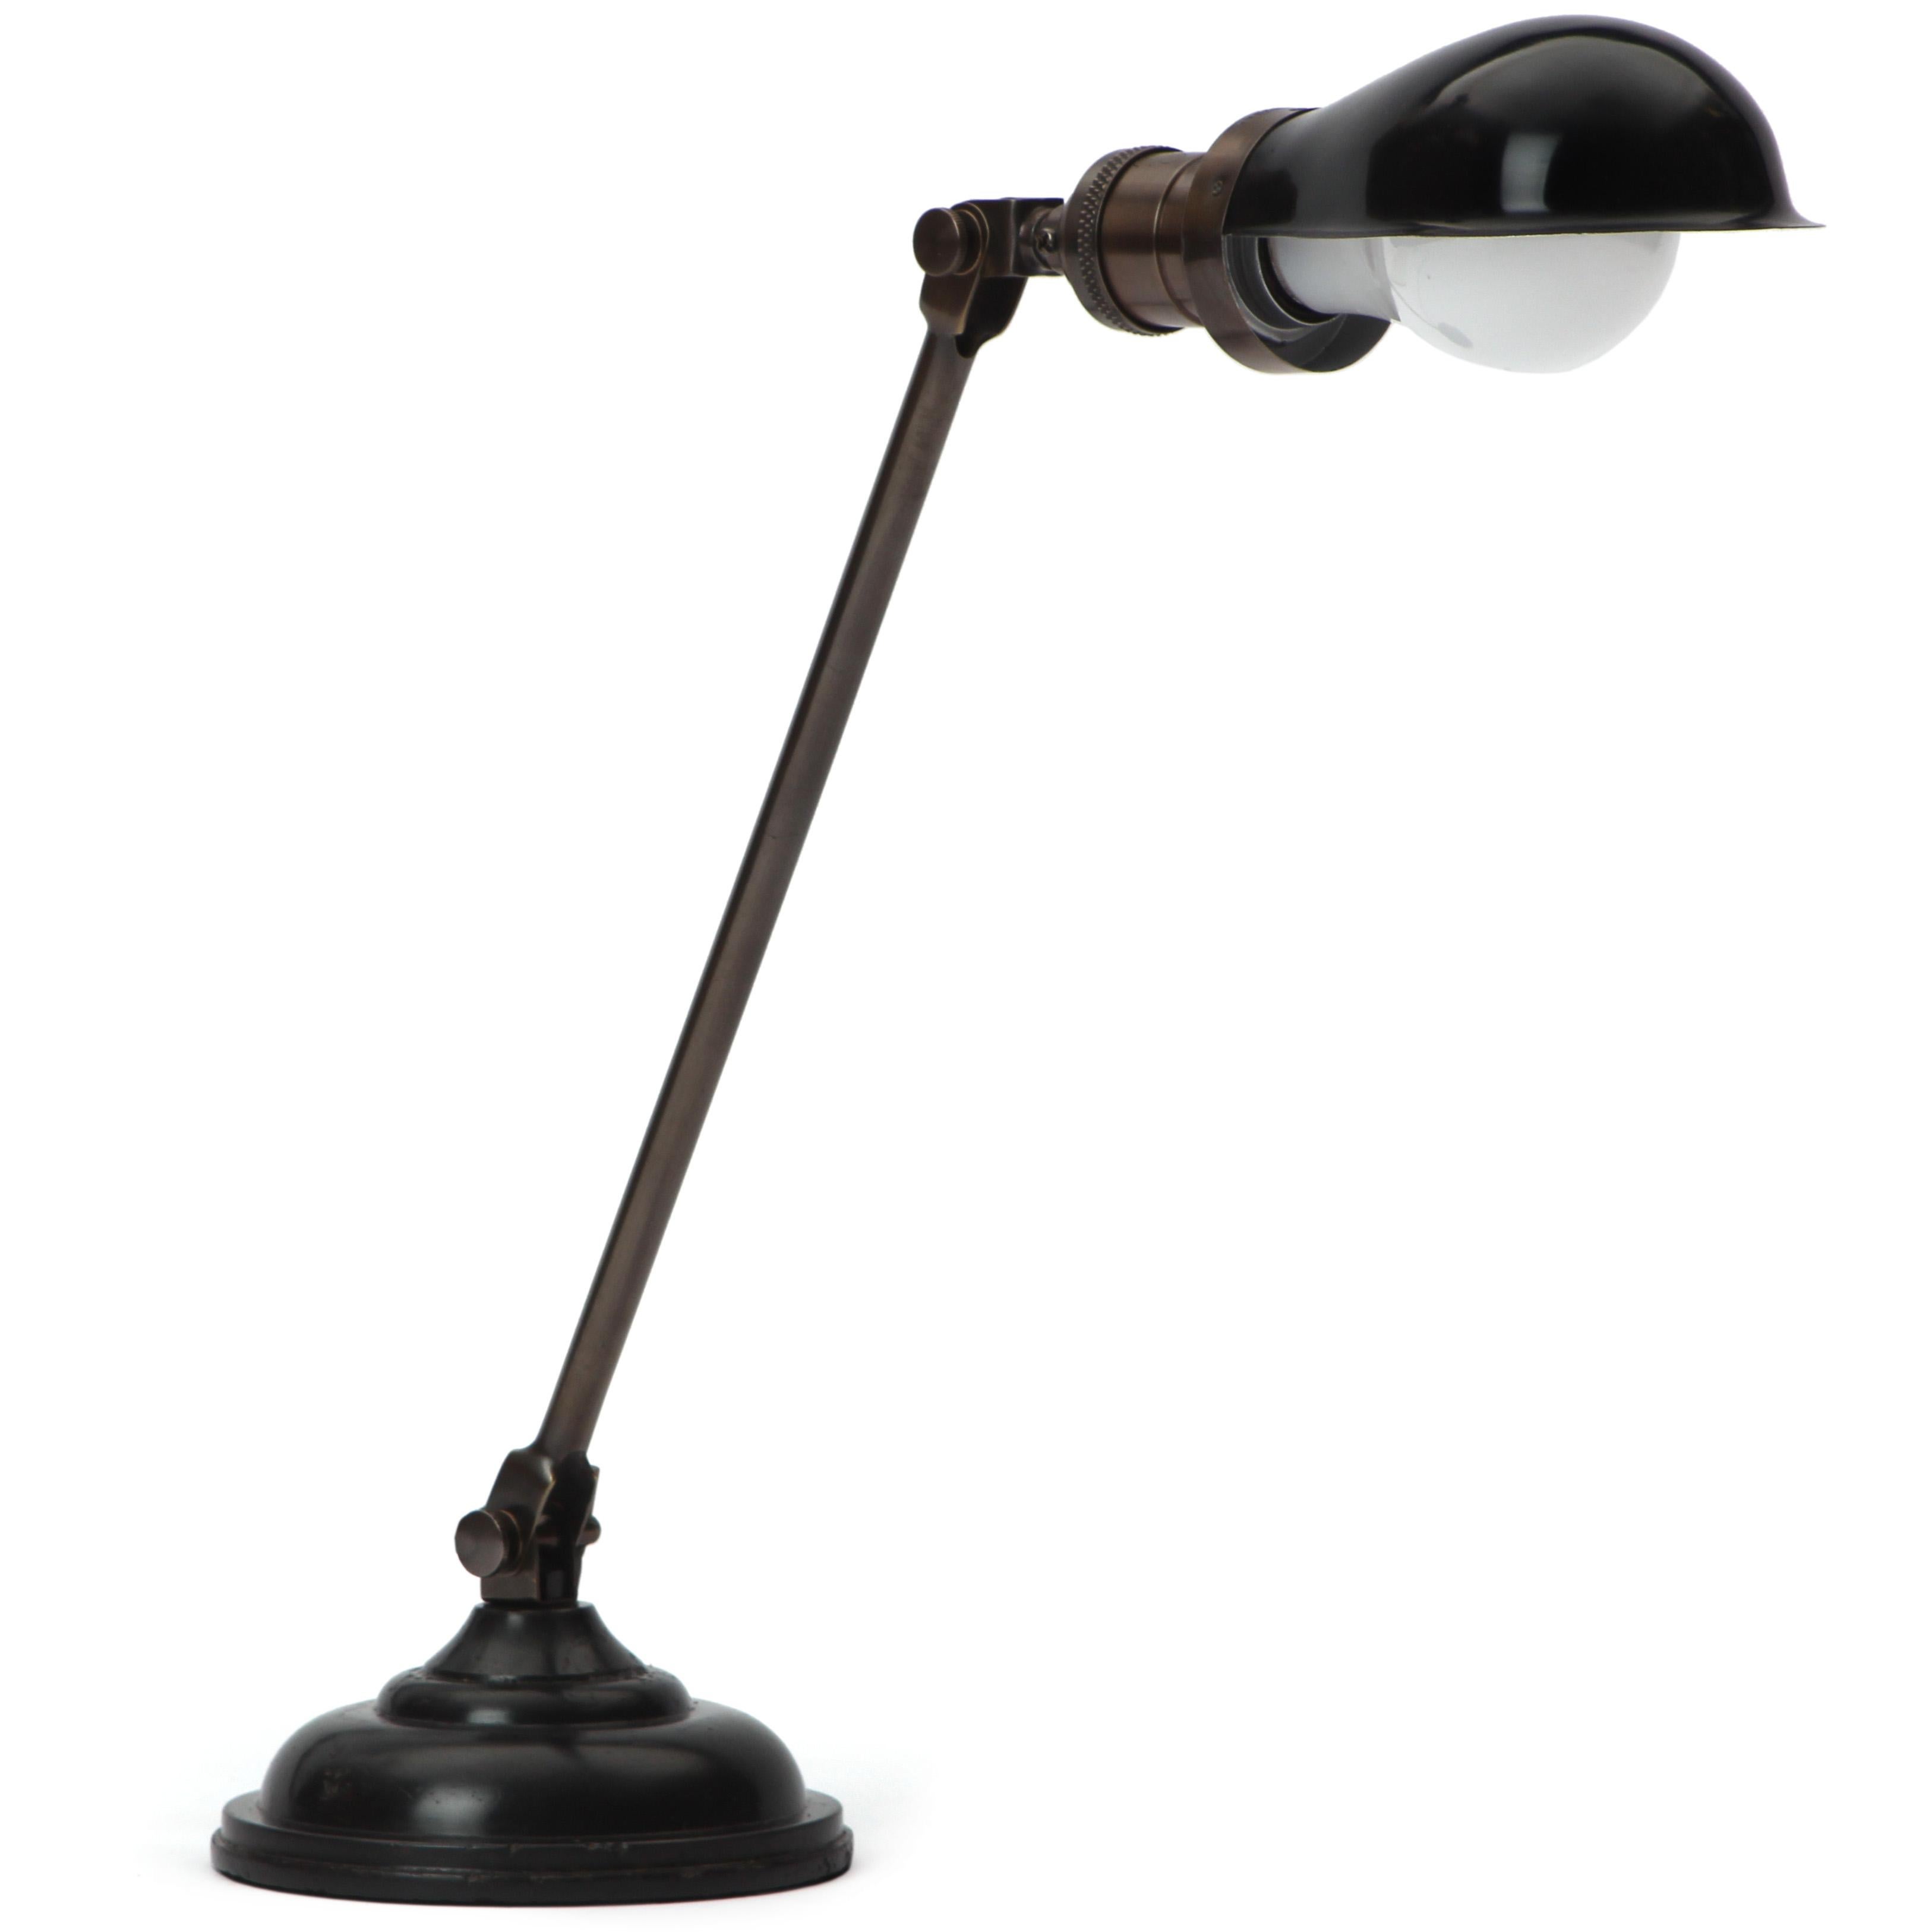 An adjustable and articulated industrial desk lamp patinated in black with a stepped base, swivelling avocado shaped hood and exposed tension bars. Manufactured in the USA circa 1920s.